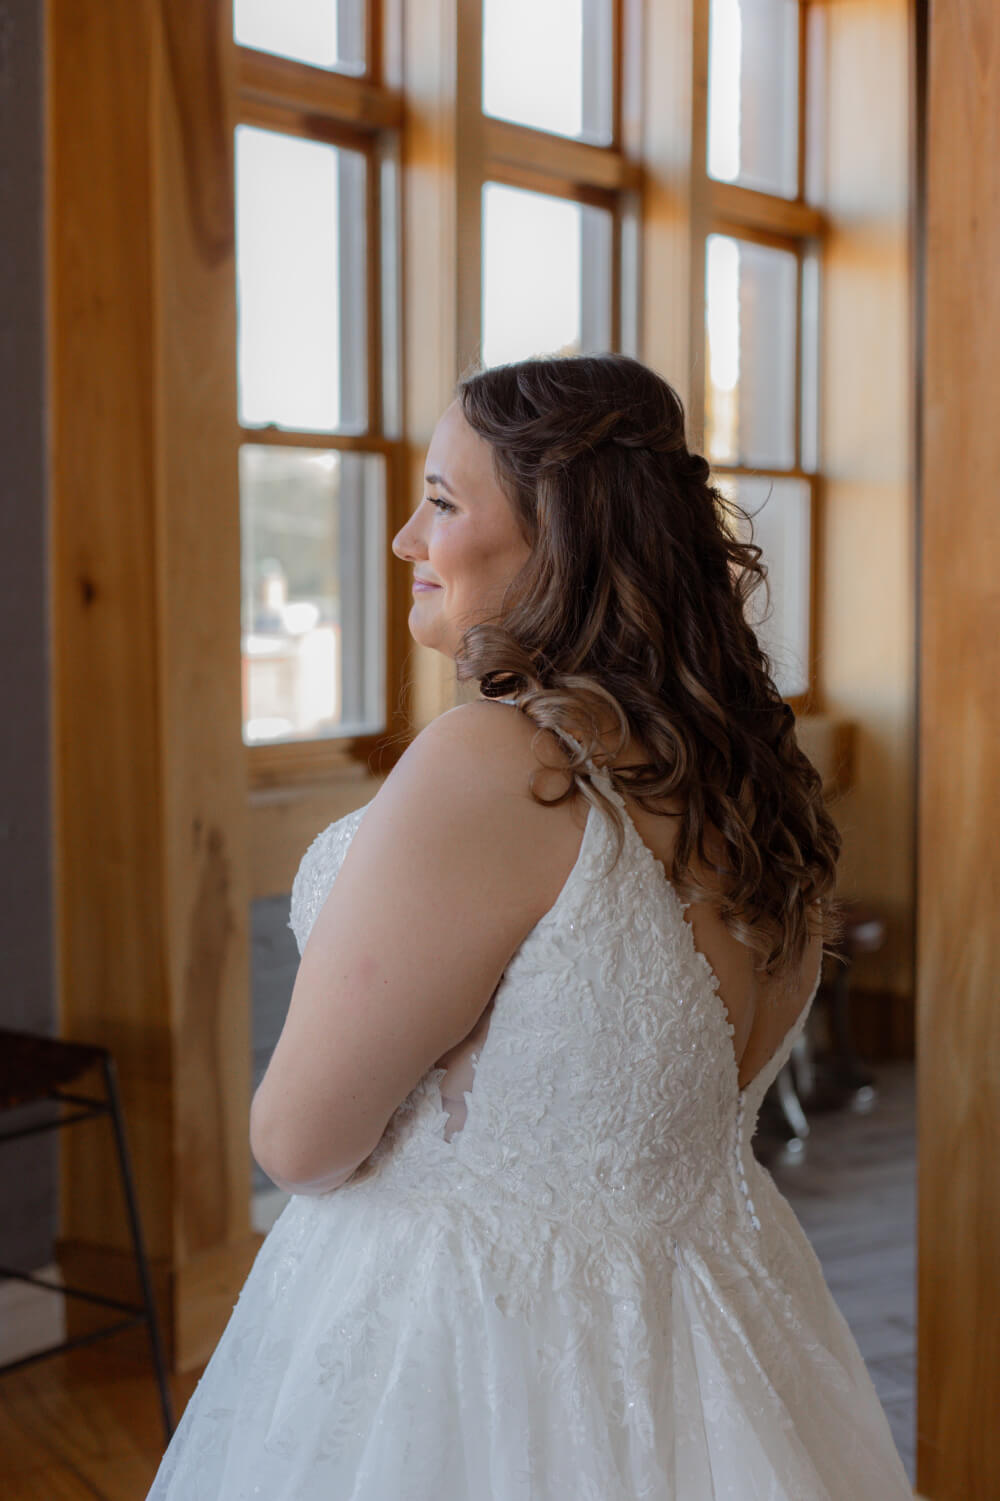 woman in a wedding dress smiling and looking out the window